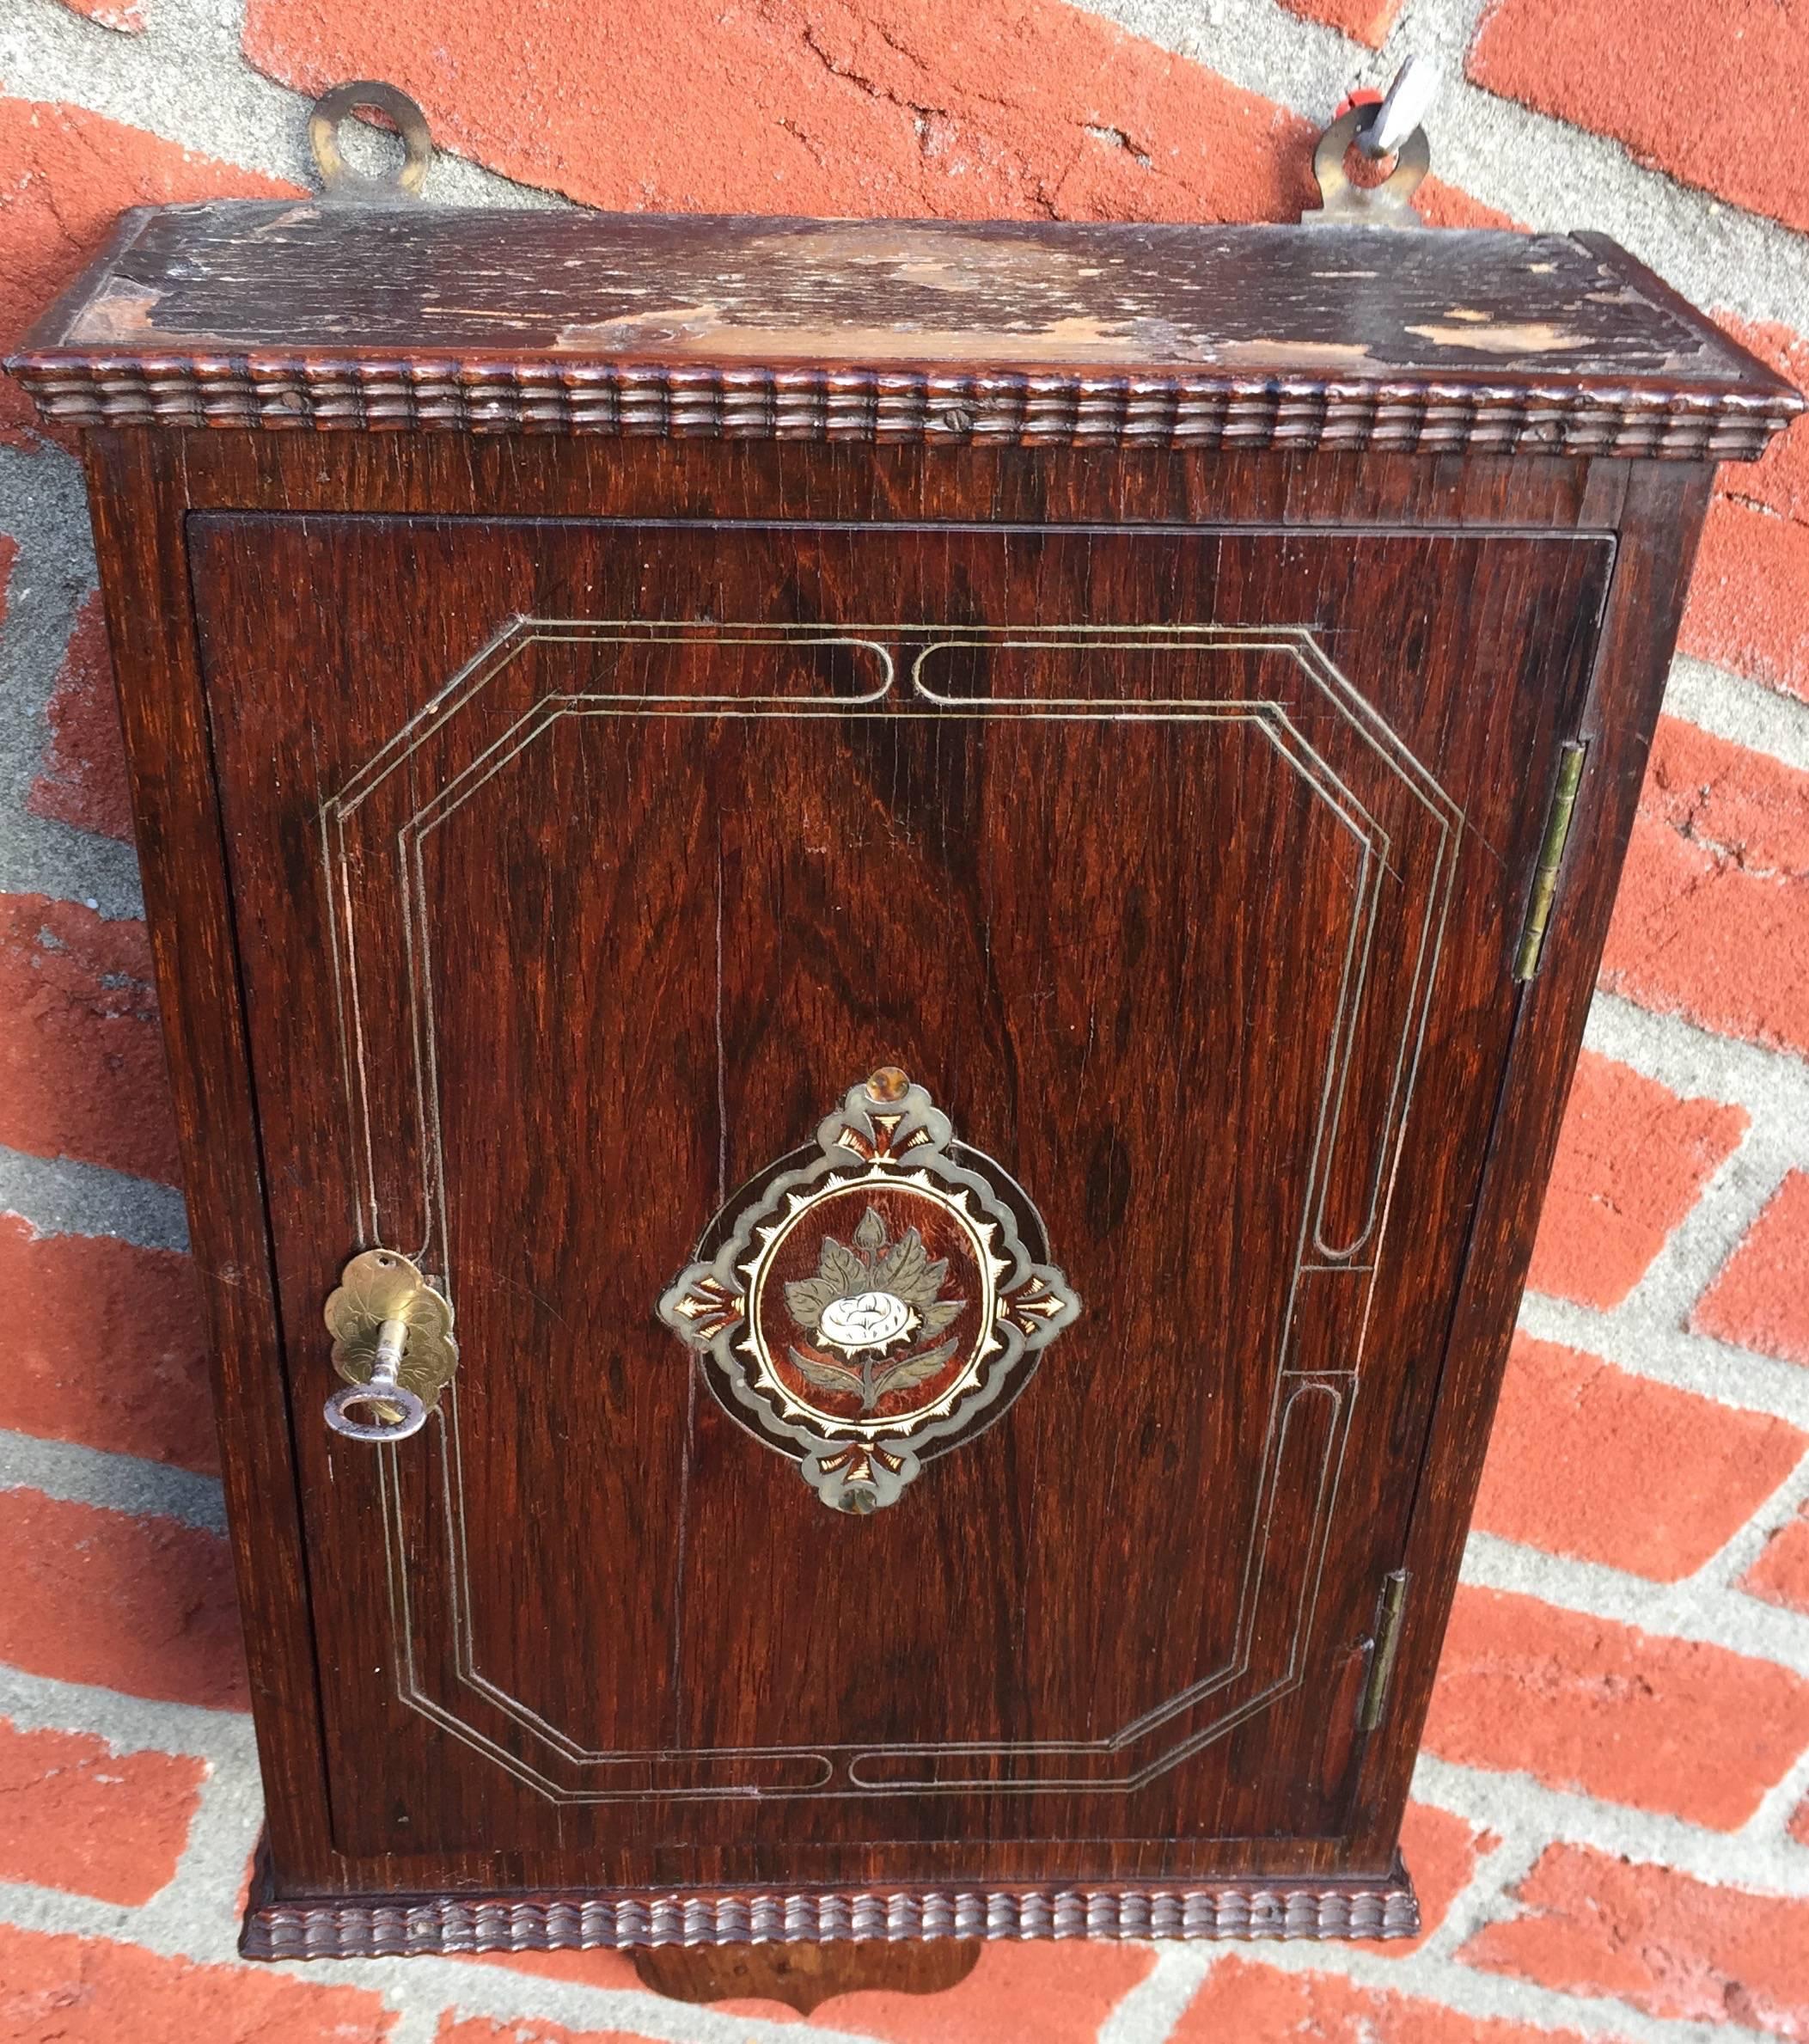 Wood 19th Century Mother-of-Pearl Inlaid Coromandel Key Rack Holder / Wall Cabinet